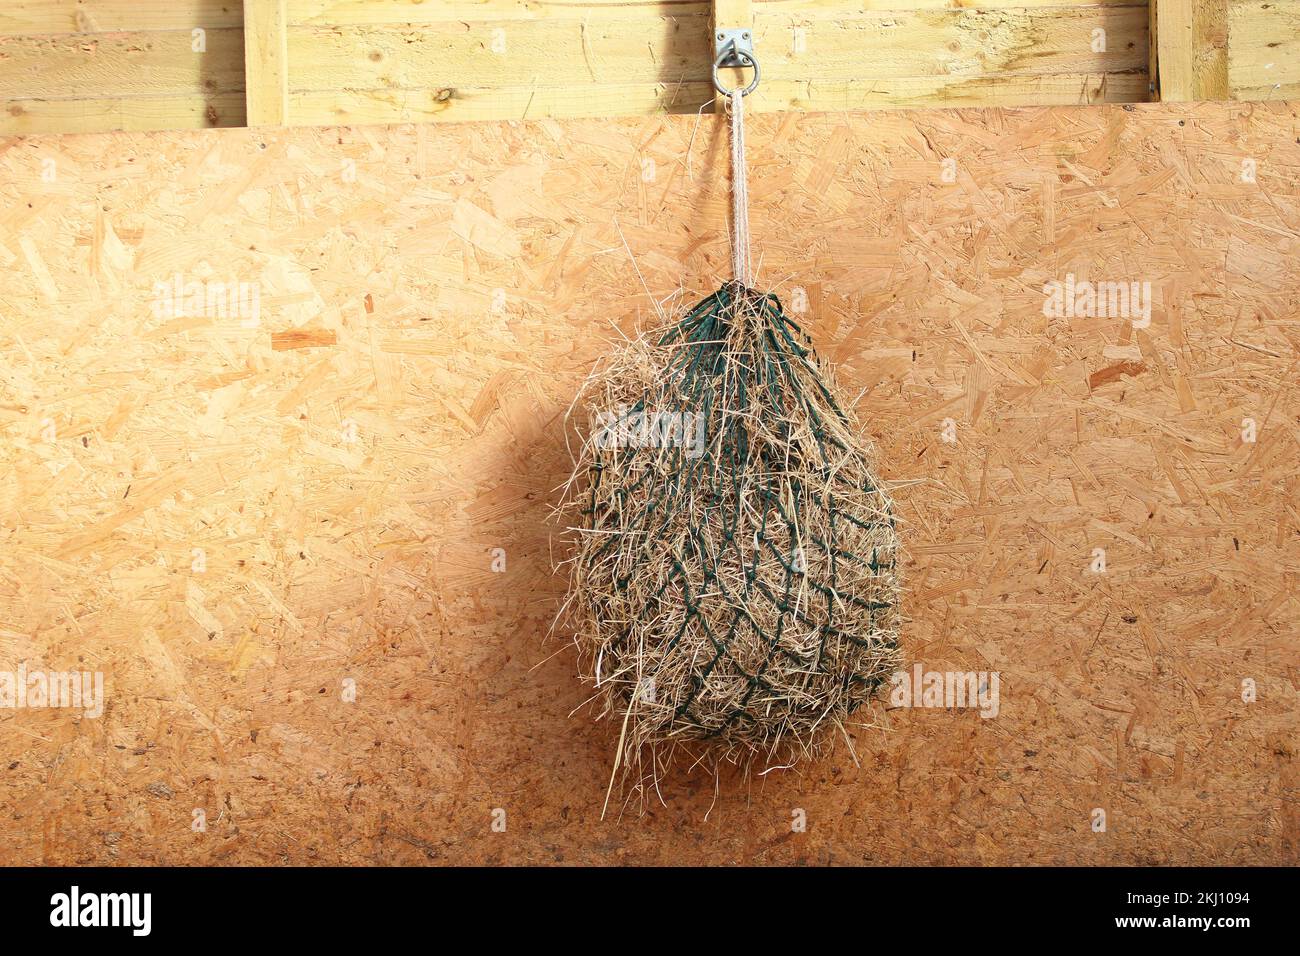 Horse feed bag containing hay hanging on a stable wall. Stock Photo